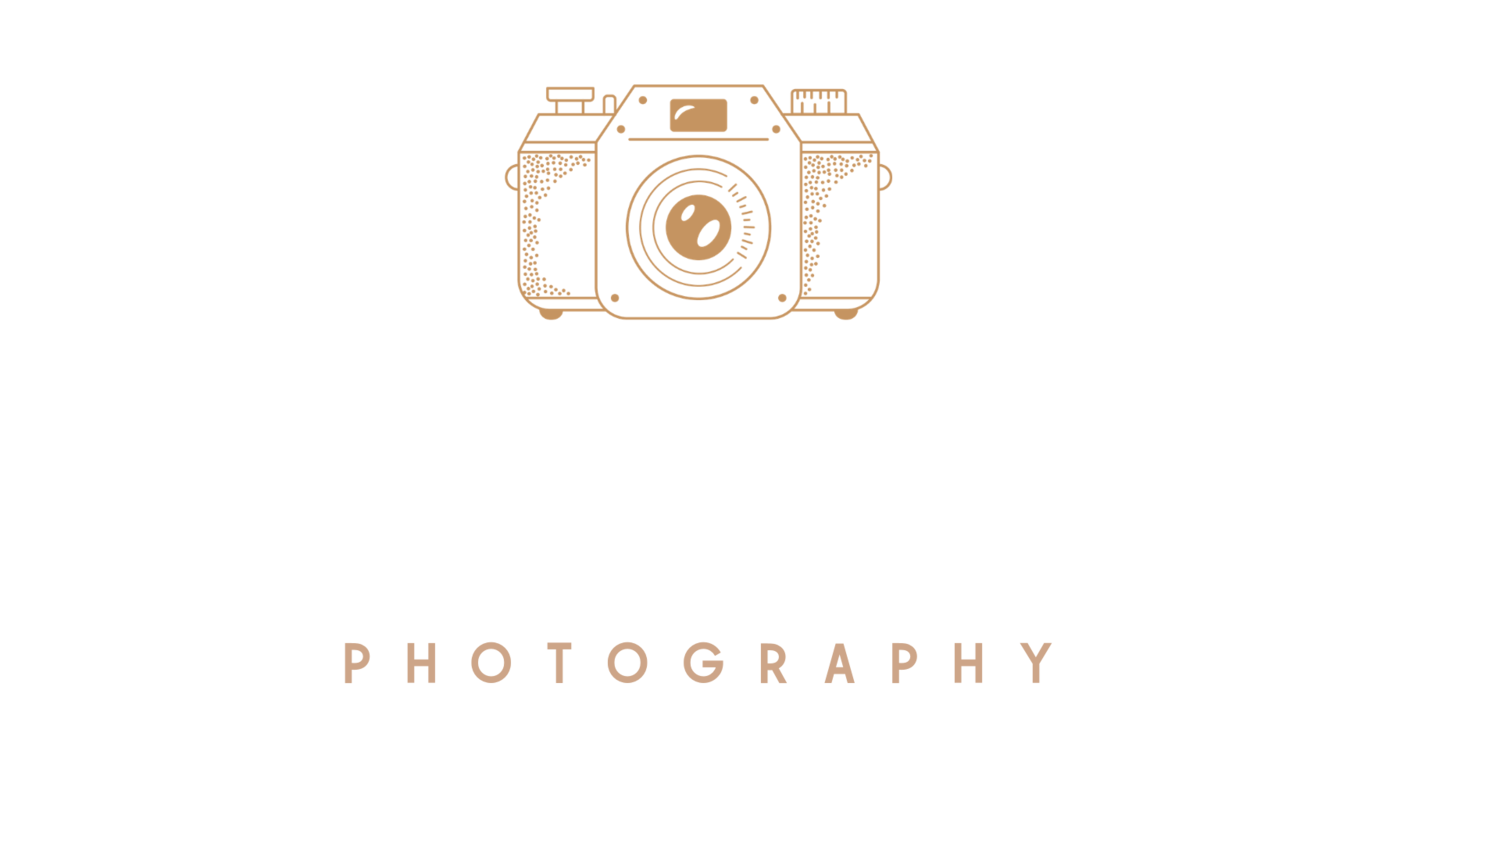 Chrissy Deming Photography